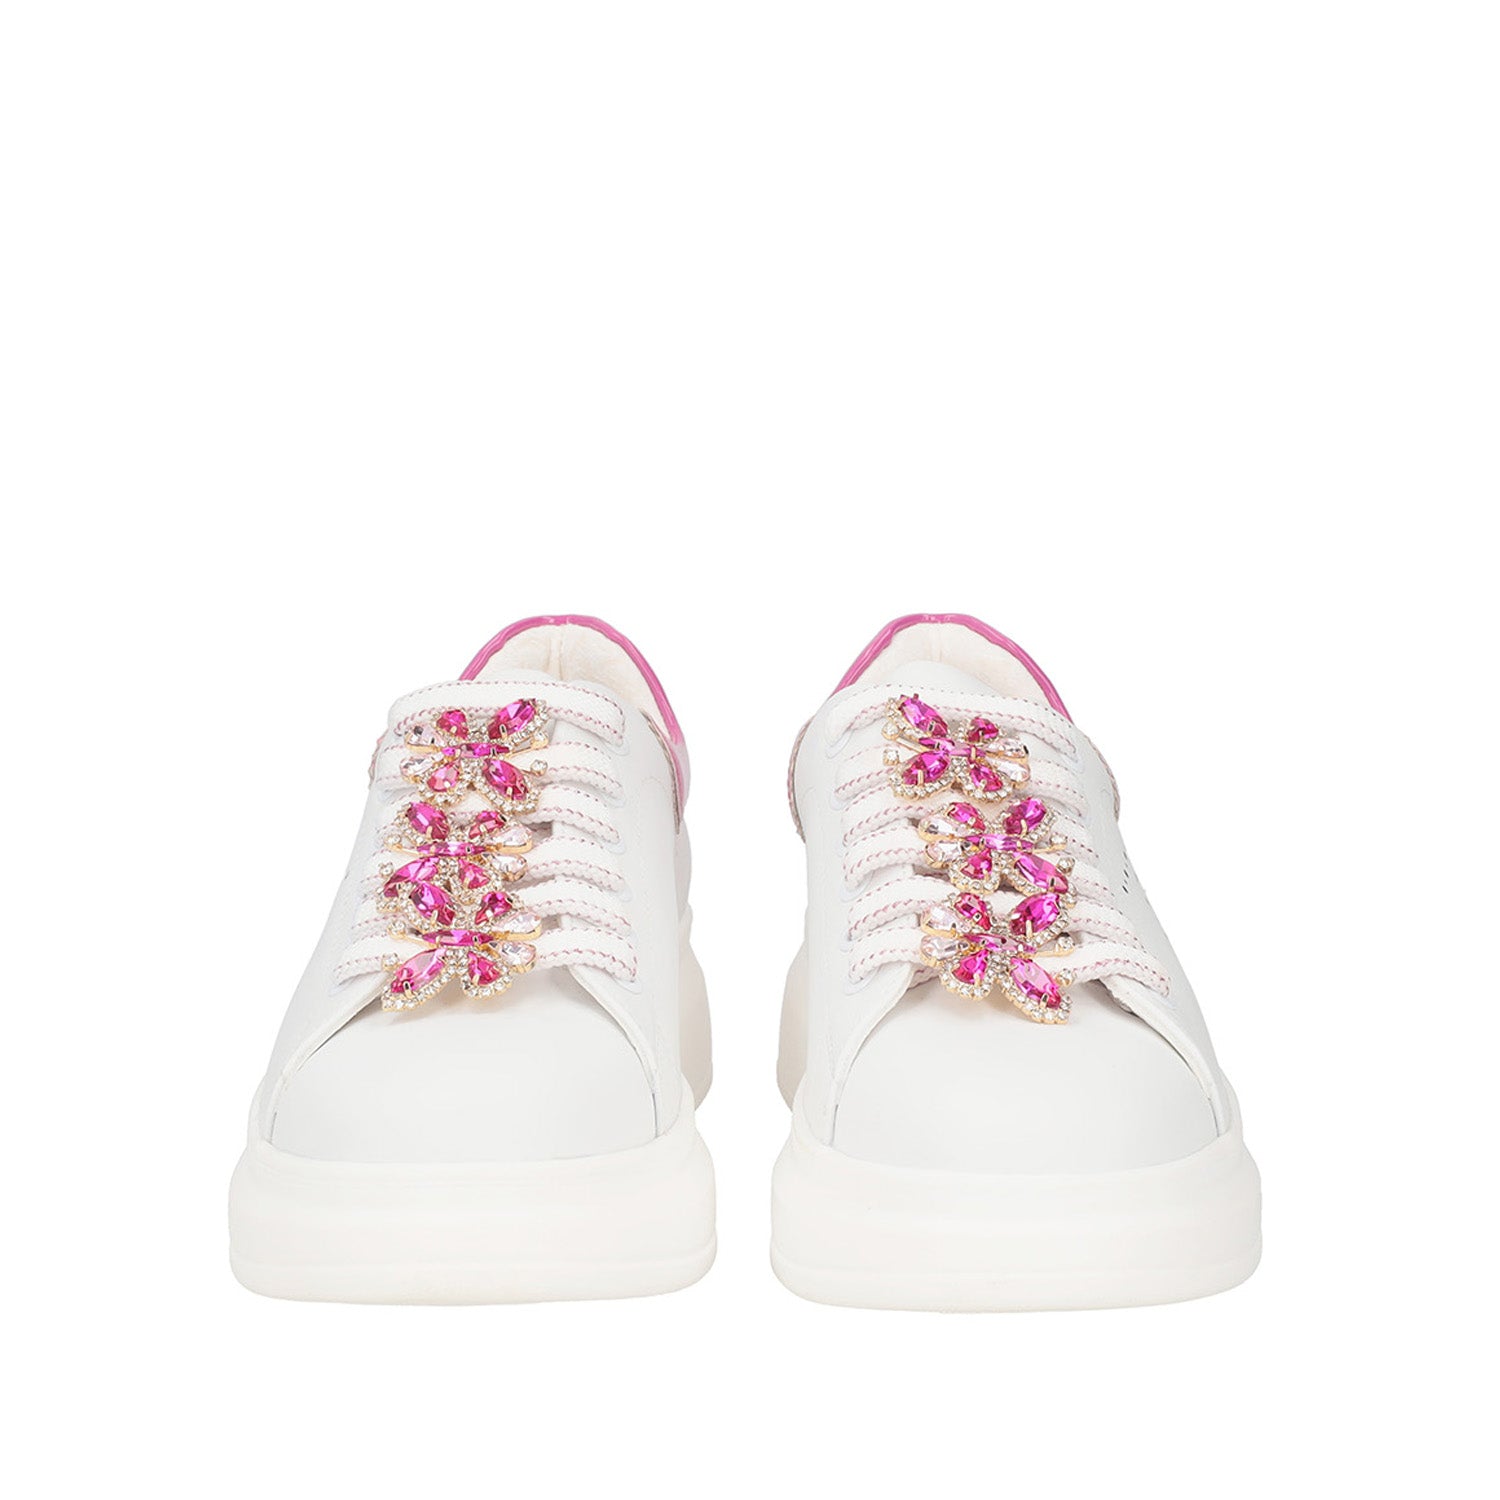 WHITE/FUXIA GLAMOUR SNEAKER WITH BUTTERFLY ACCESSORY | Tosca Blu